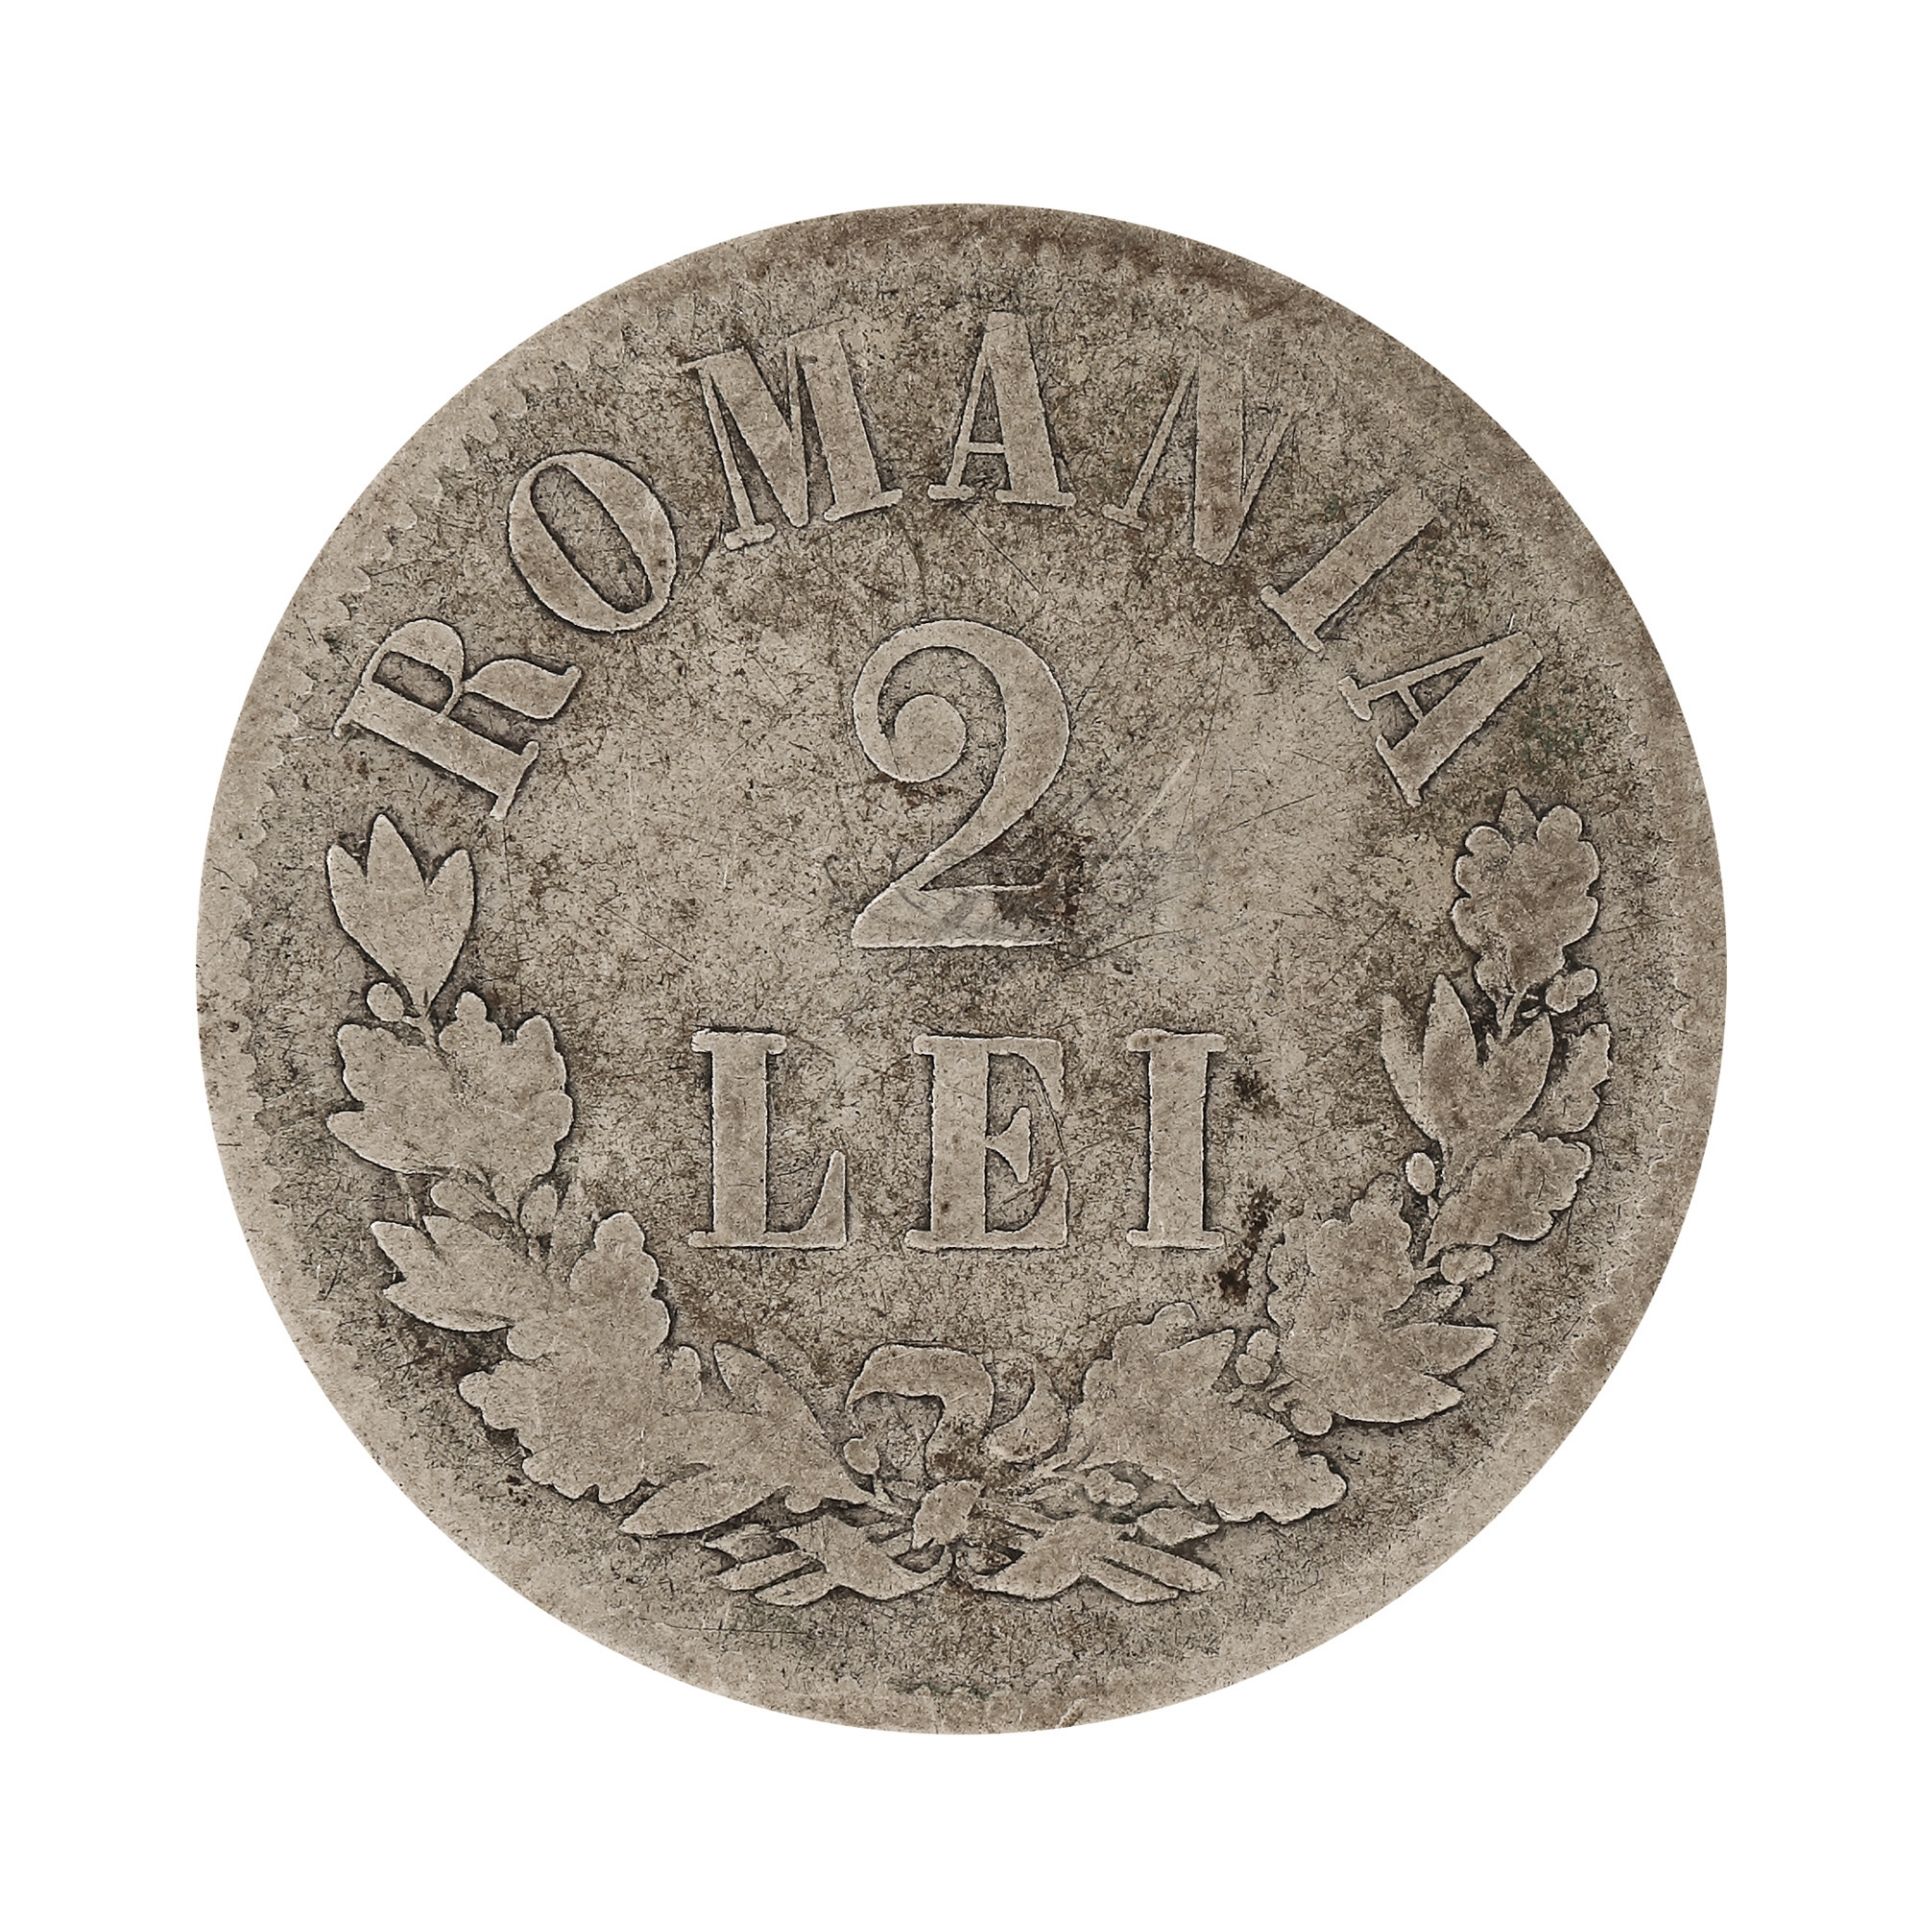 2 Lei 1875 coin, silver - Image 2 of 2